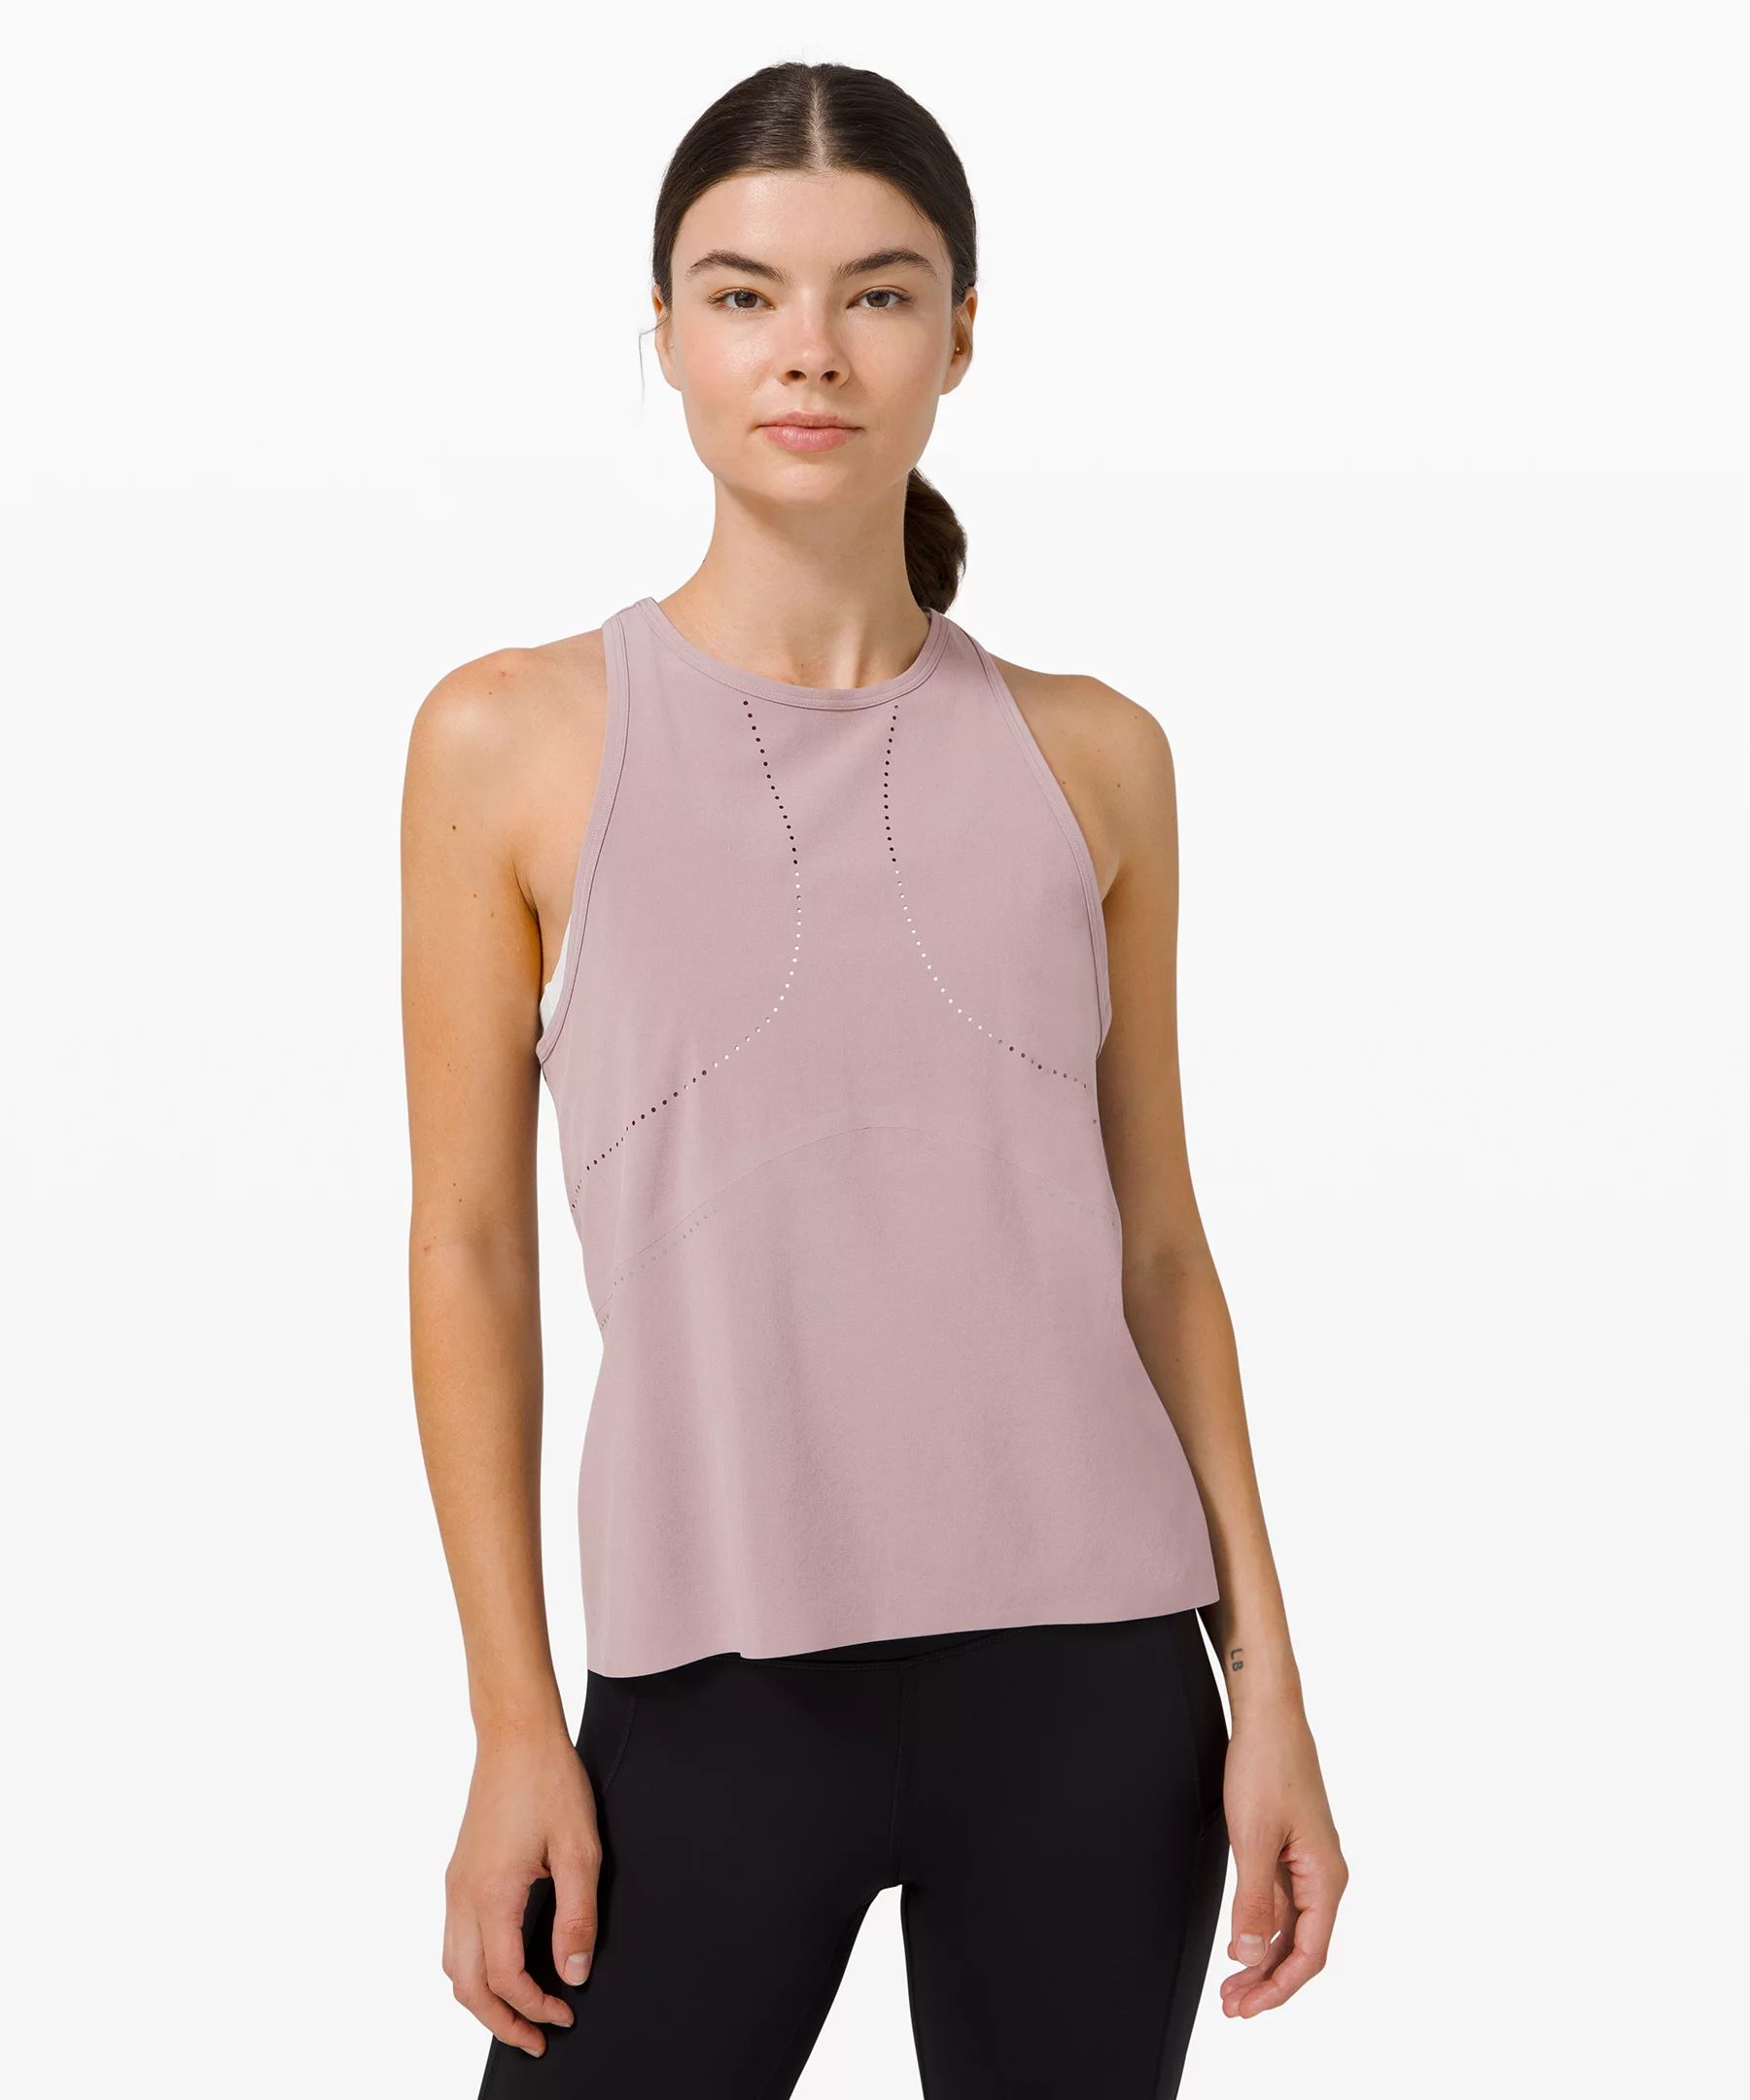 Find Your Pace Tank | Lululemon (US)